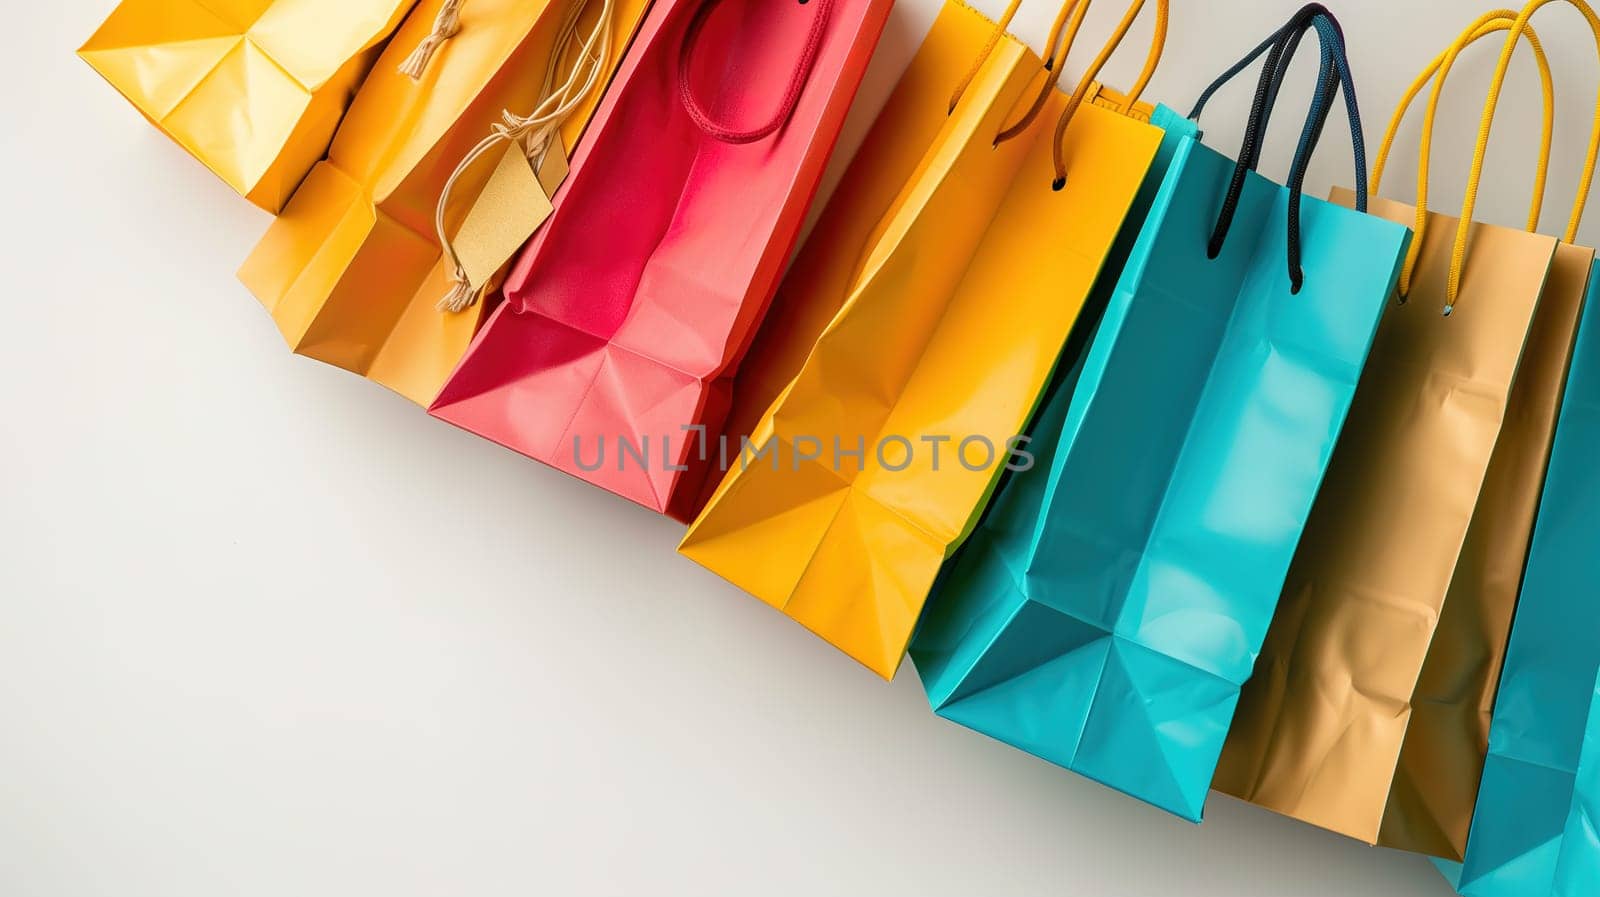 A row of vibrant shopping bags in various colors, hanging neatly on the wall. Each bag is different, representing a unique purchase from a retail store. The bags are ready for use or display, symbolizing shopping and the consumer experience.